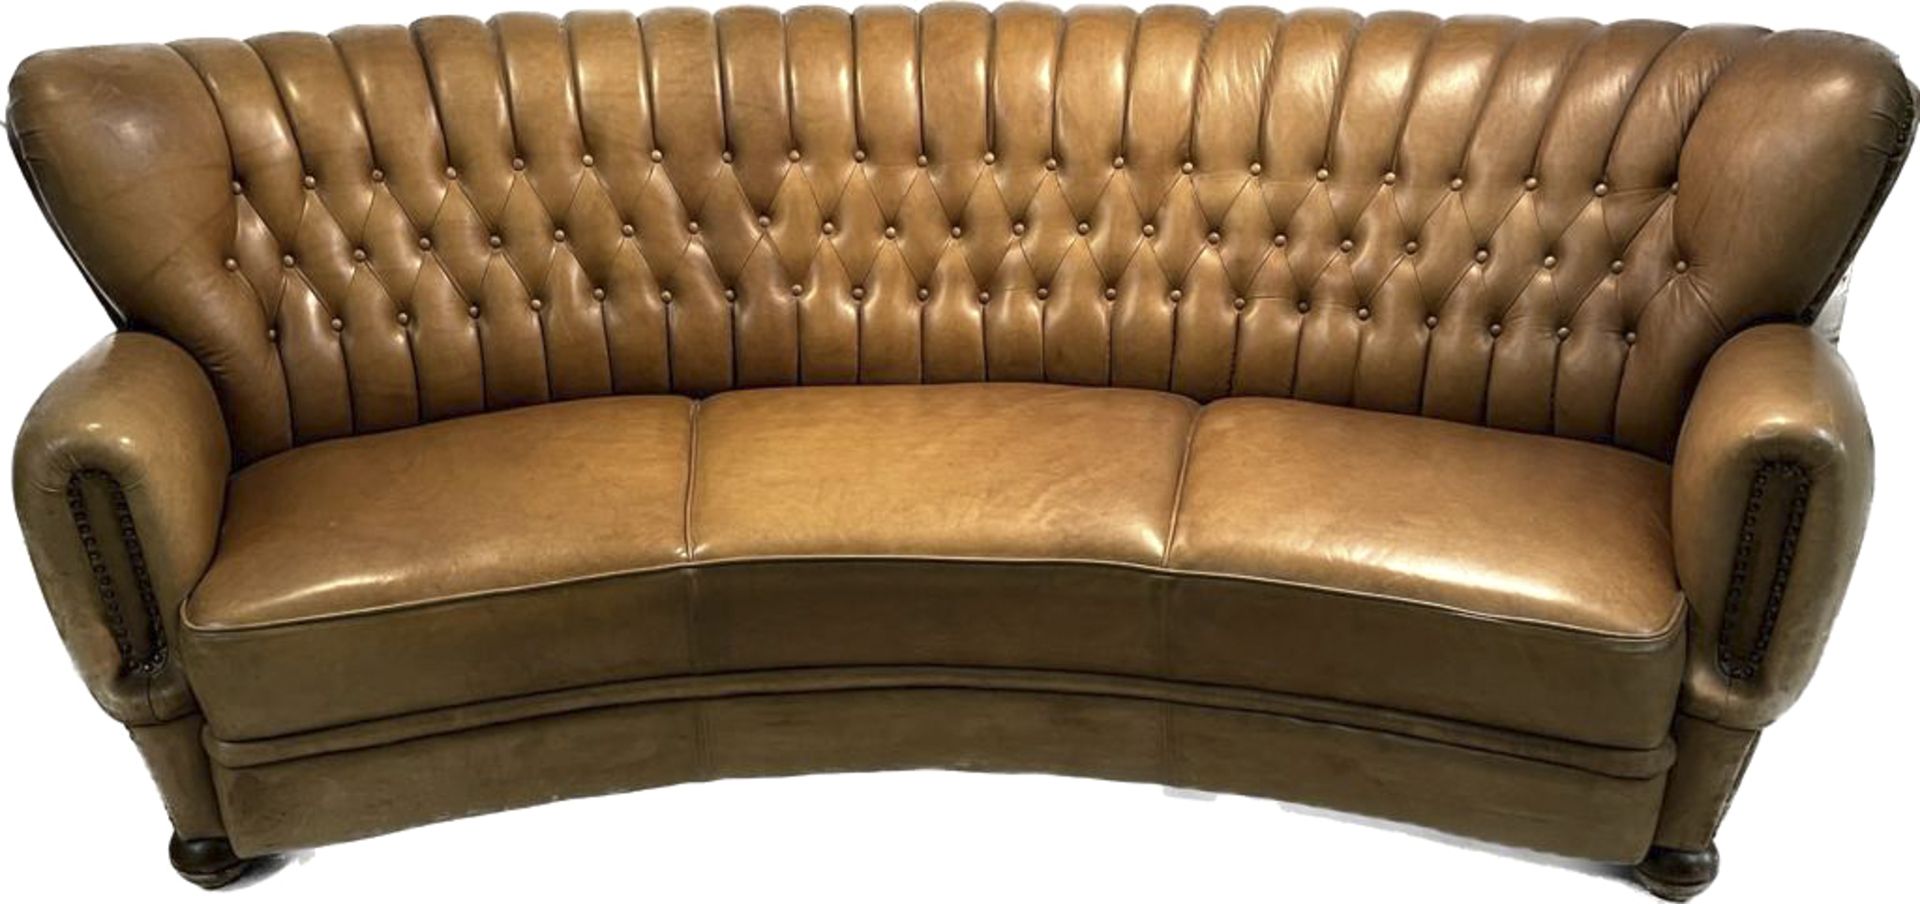 Sofa around 1920/30, leather upholstery, 80 x 230 x 80 cm - The furniture cannot be viewed in our